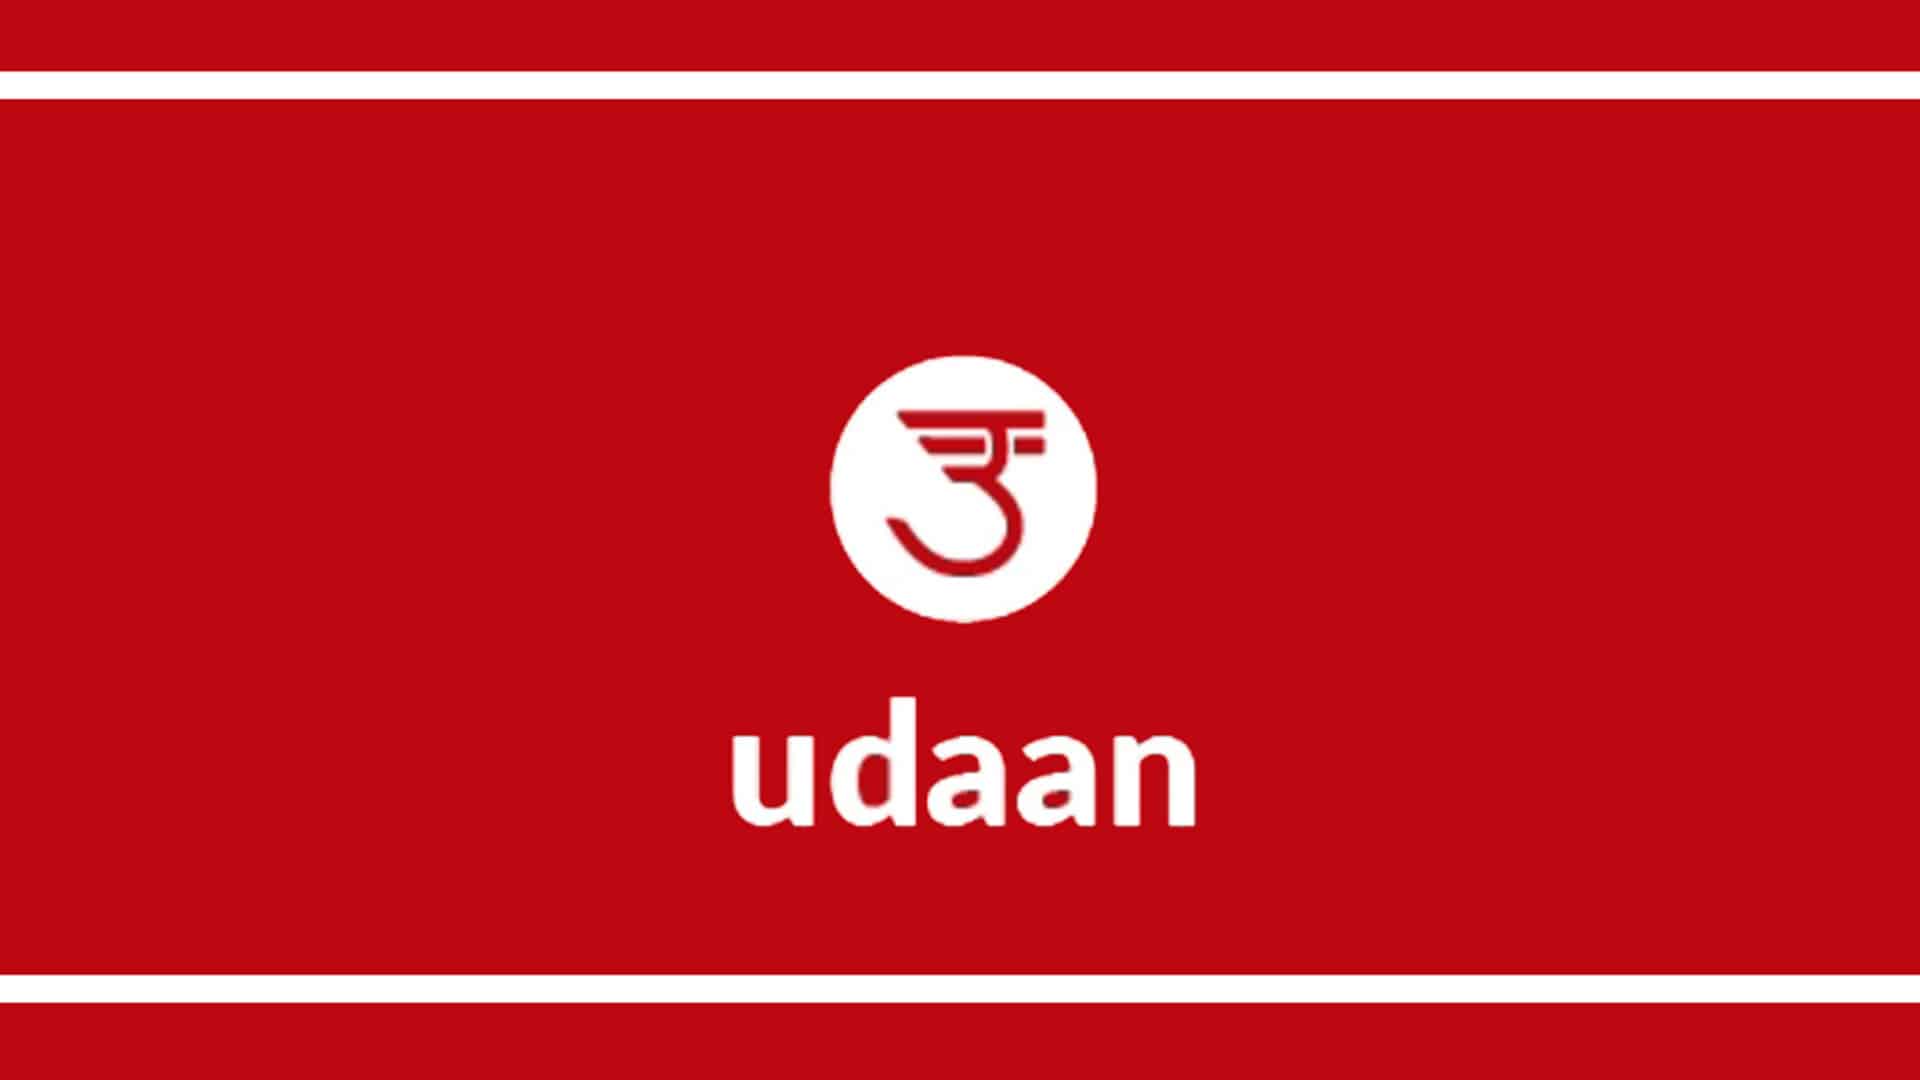 udaan helps over 400 sellers in electronics category notch sales worth Rs 1 cr each